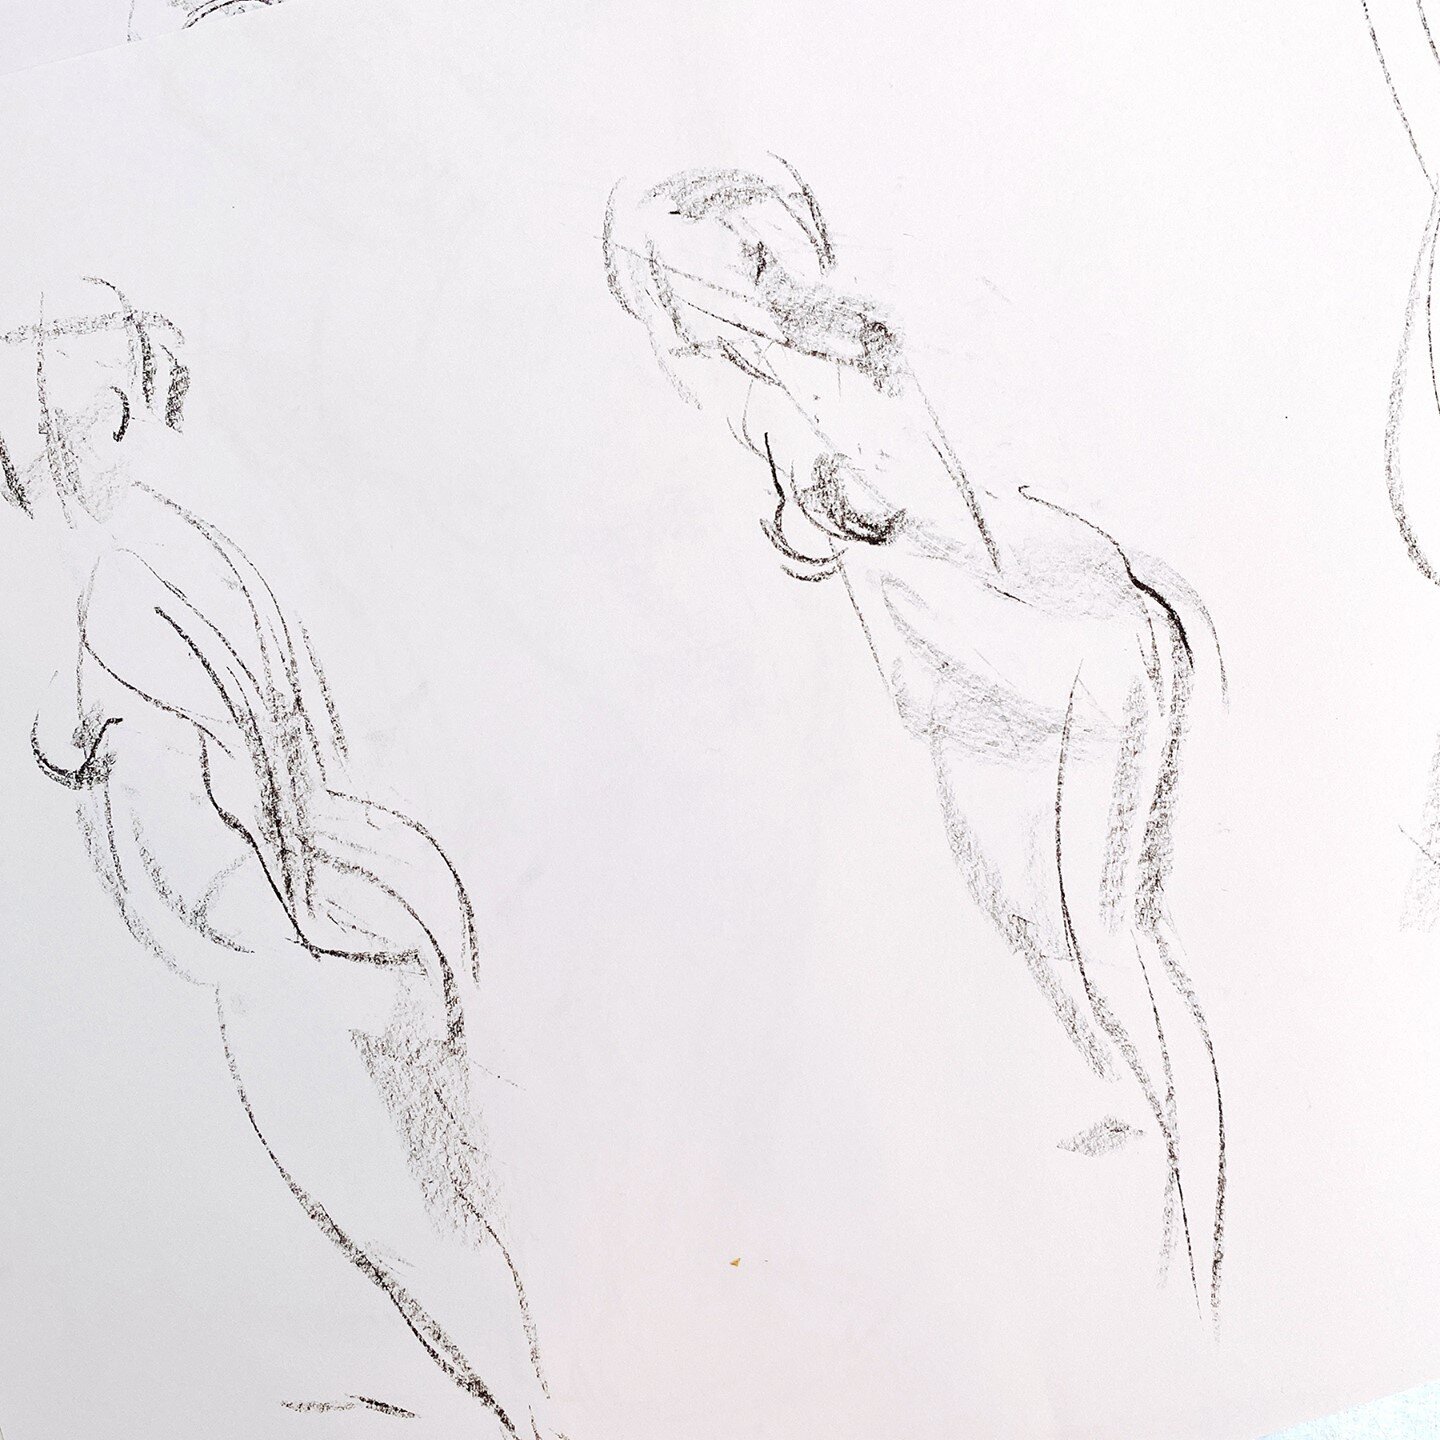 Life drawing is on tomorrow night! Come along ⁠and enjoy the focus!⁠
⁠
https://www.damienlucassculpture.com/life-drawing-byron⁠
.⁠
Currently, we're limiting numbers, so your reservation will help us manage class size as well as ensure your preference